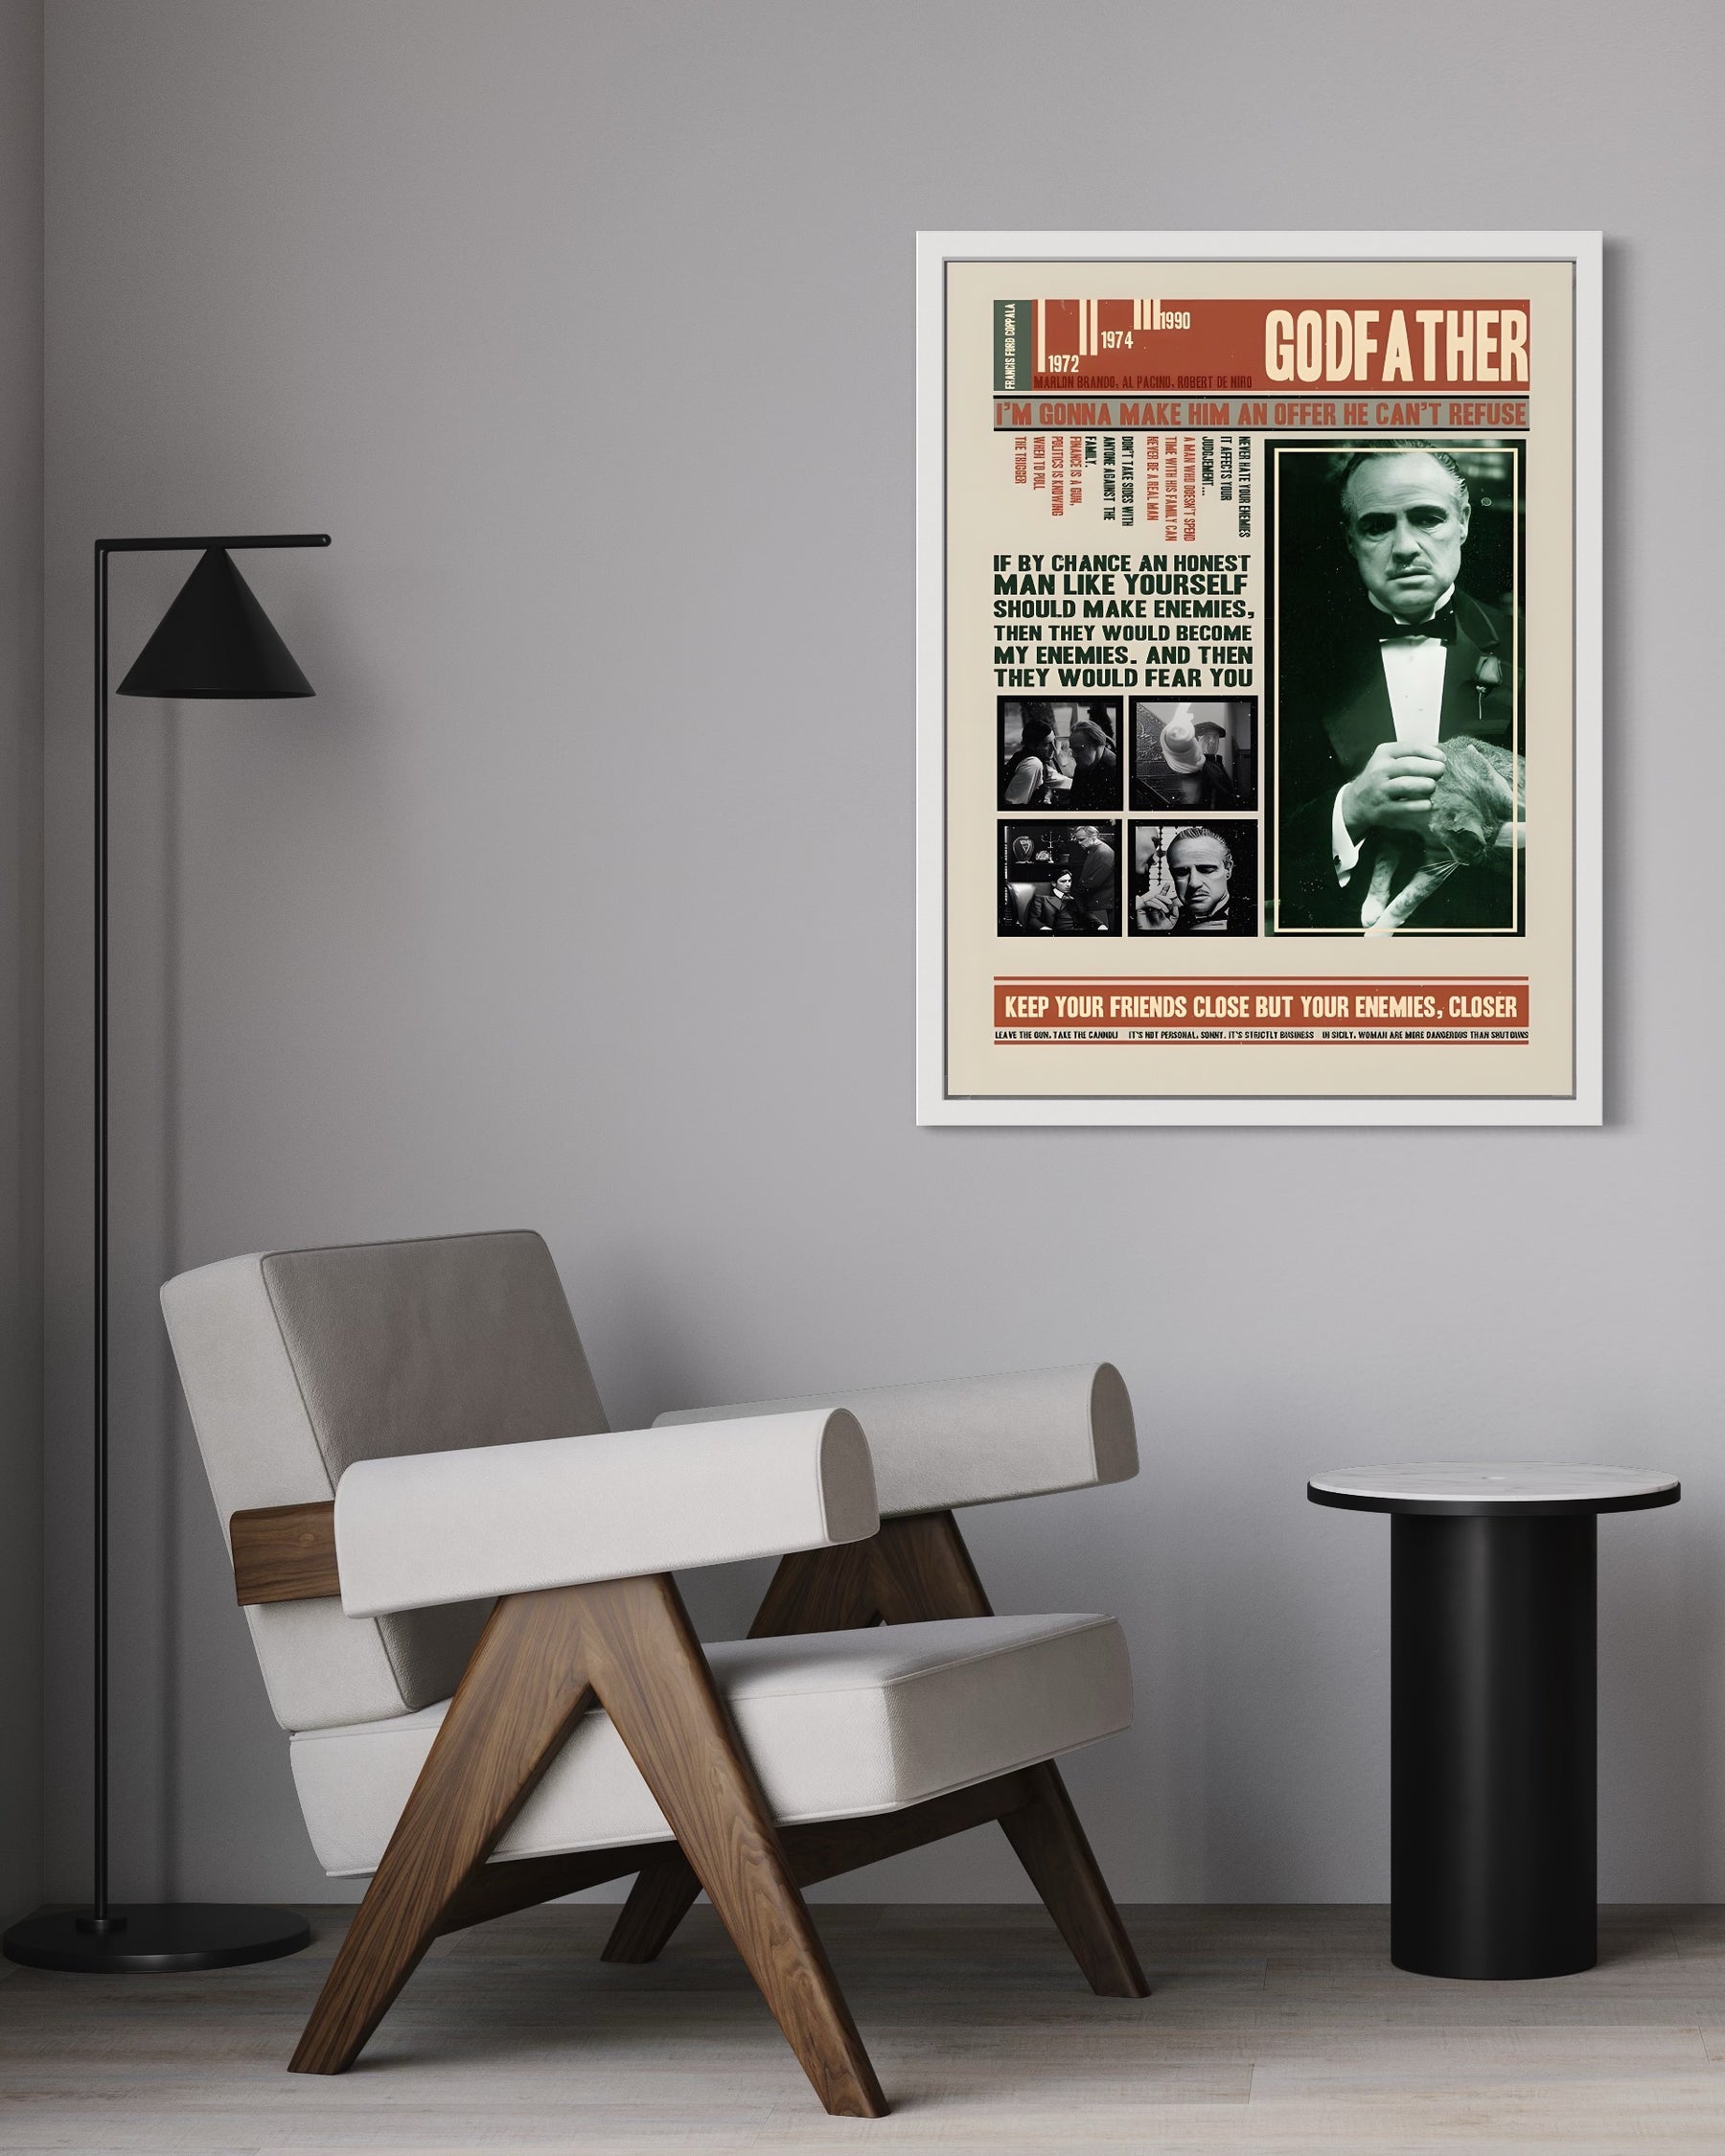 Godfather quotes wall art